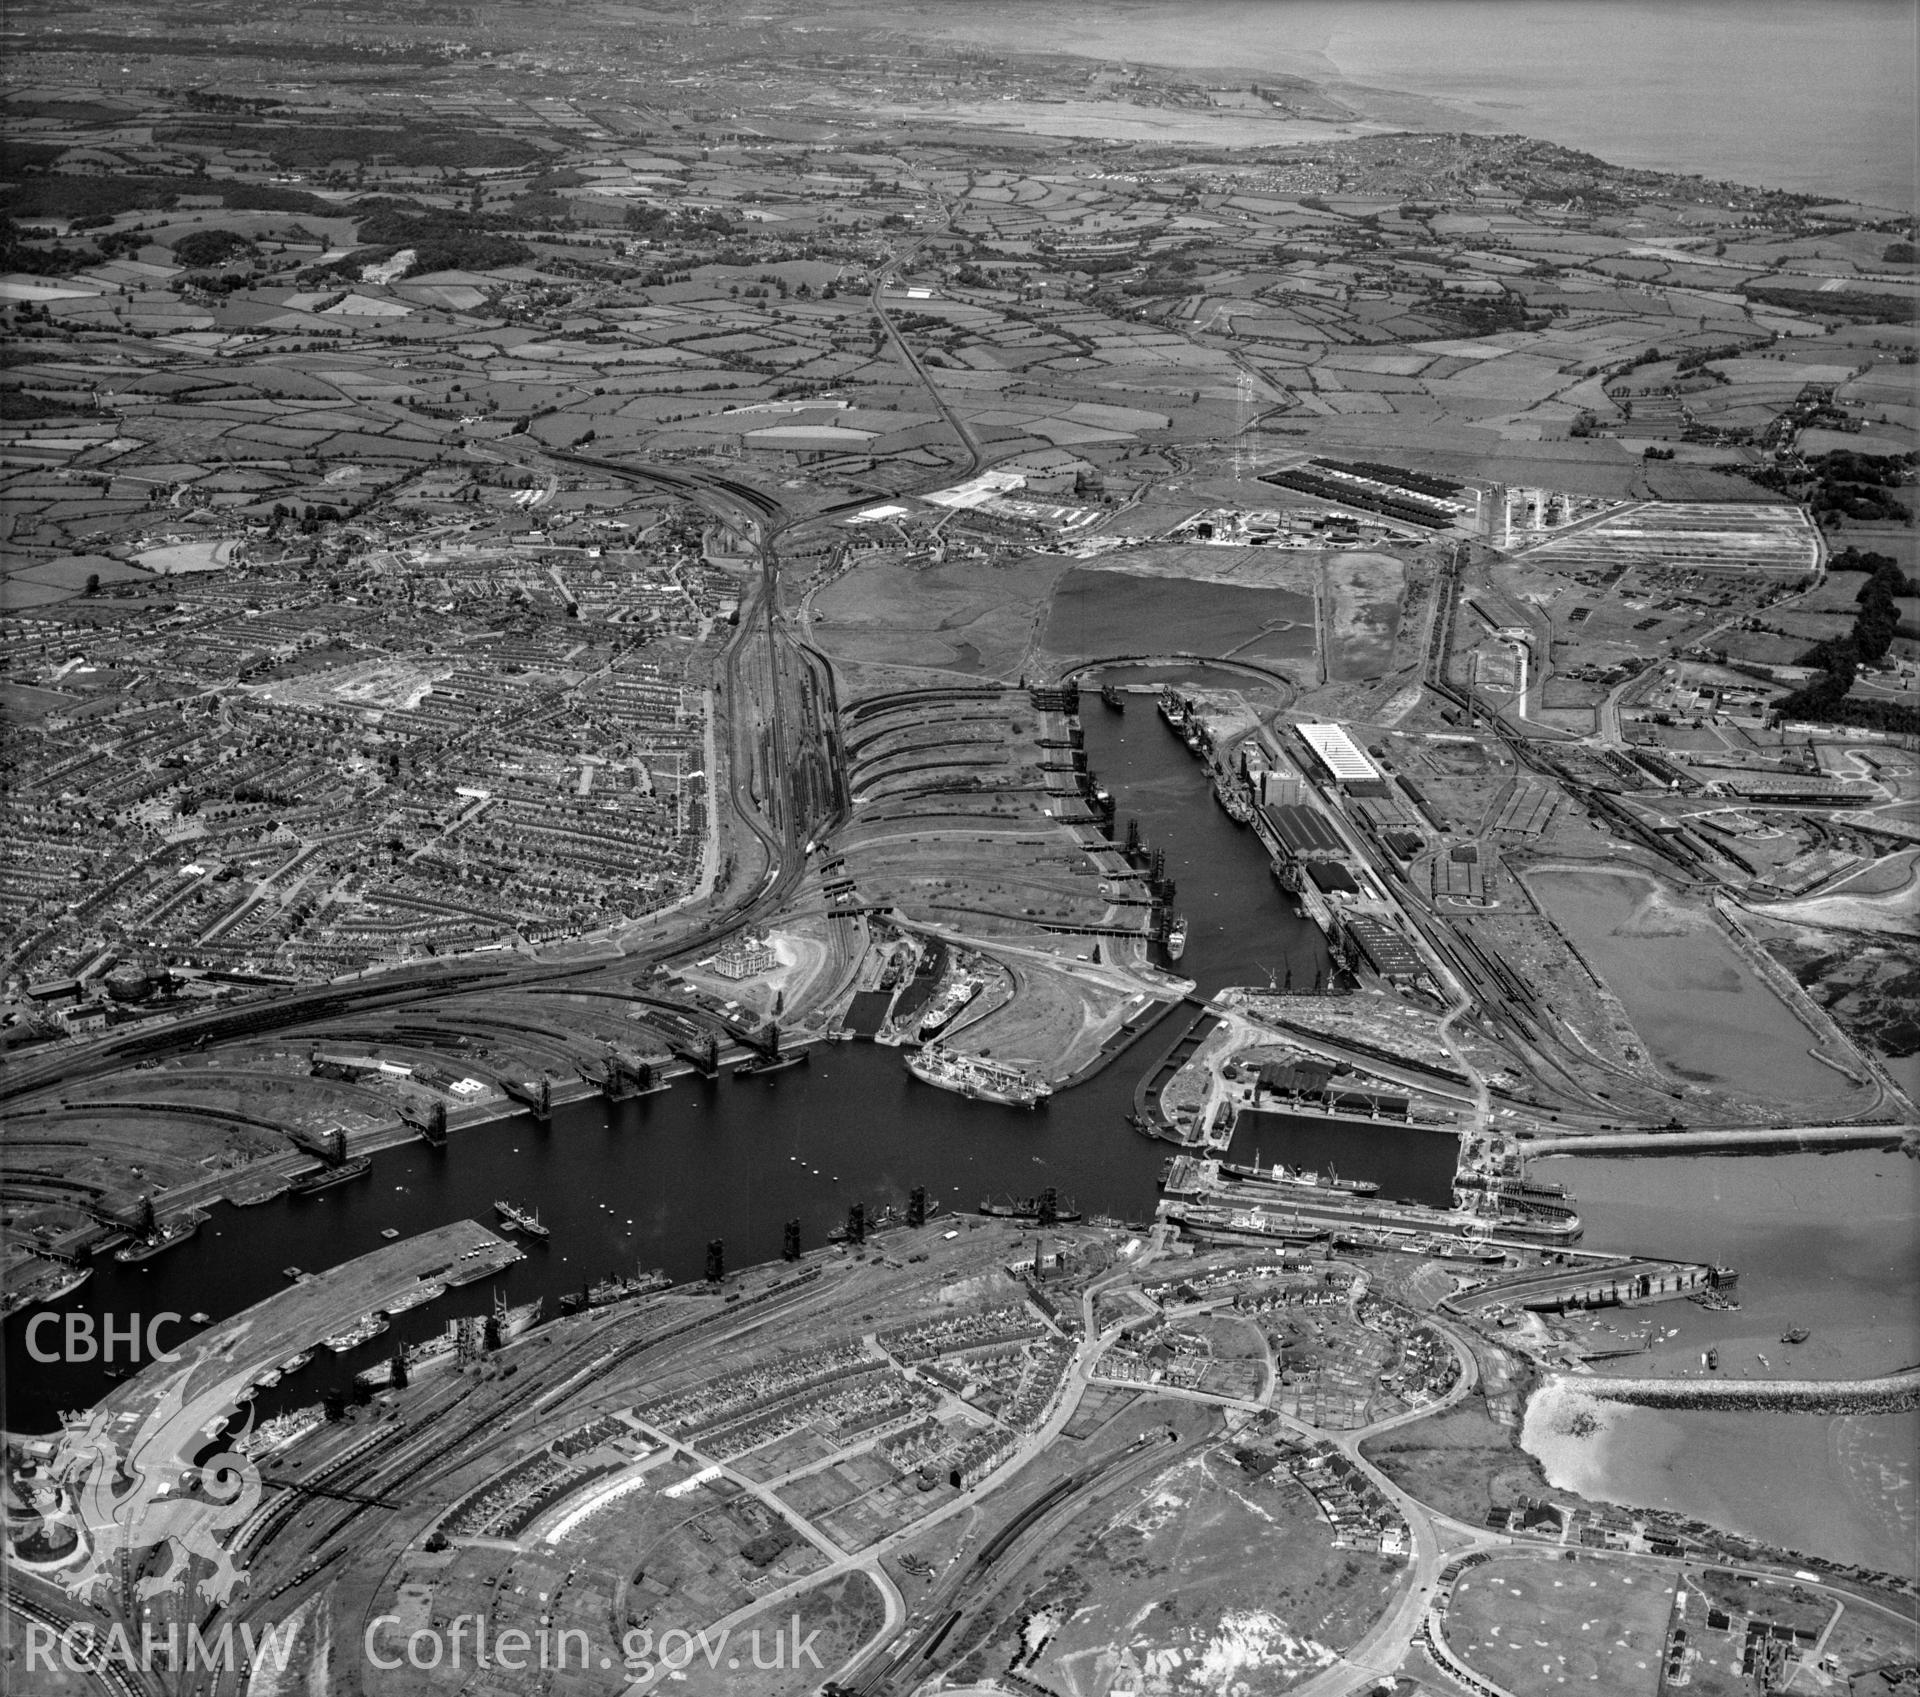 View of Barry showing docks